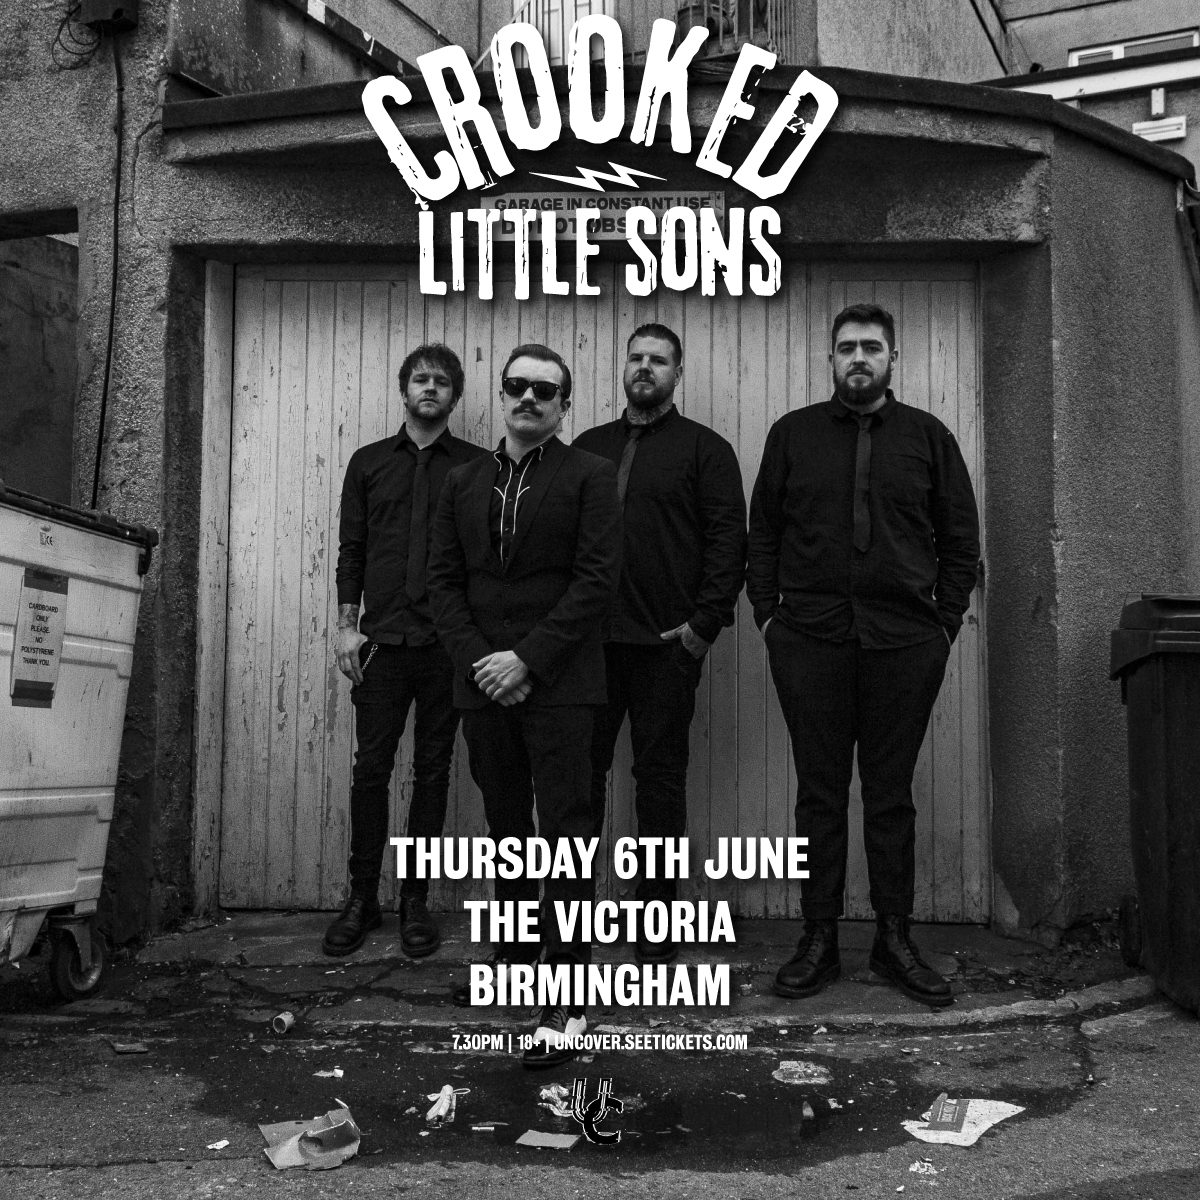 Catch Exeter-born punk rock 'n' roll purveyors @CrookedLSons when they join us for a headline show on Thursday, 6th June 💥 Tickets on sale now: bit.ly/44pa4Zr